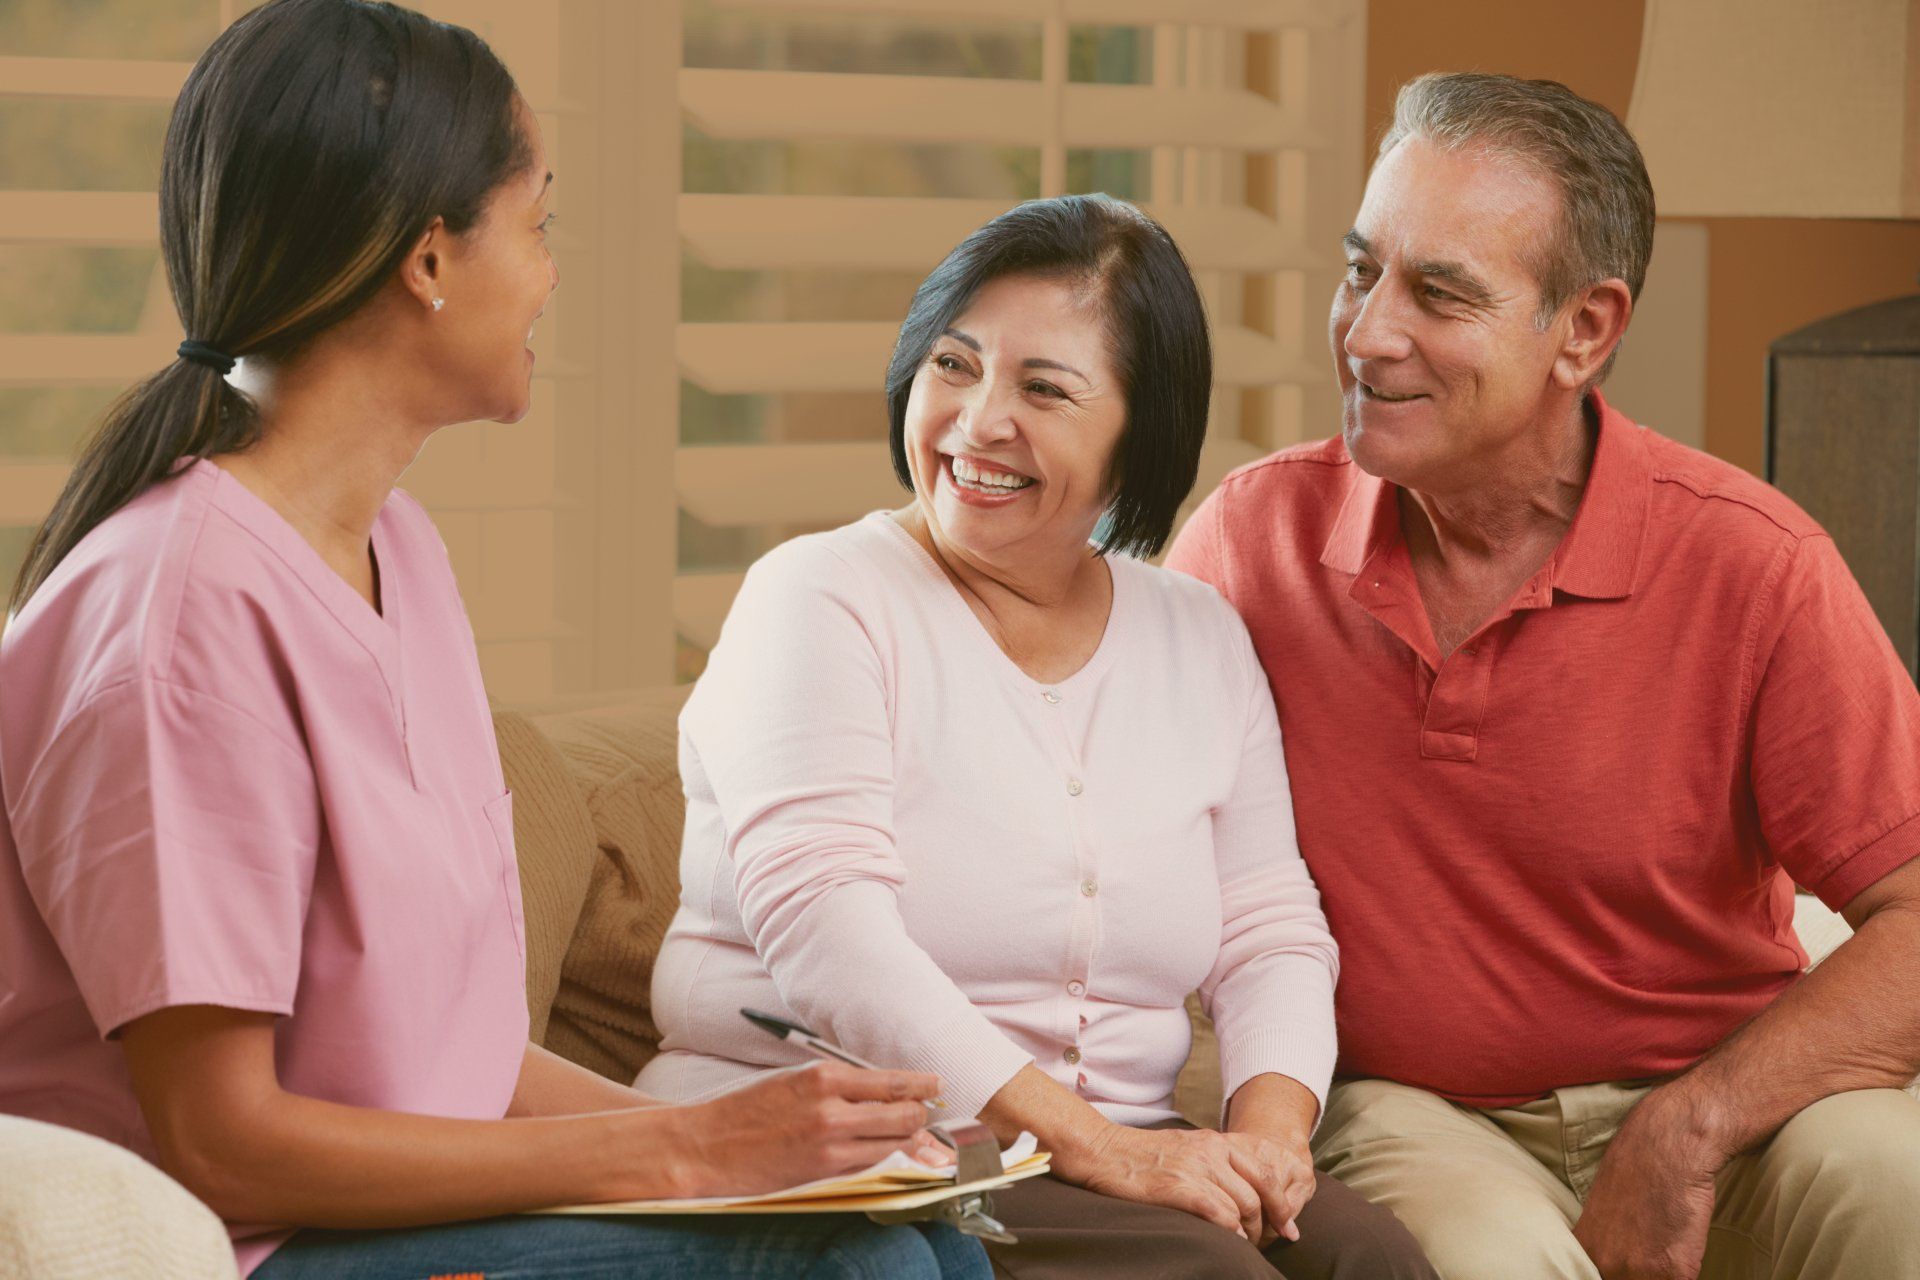 ARE YOU IN NEED OF IN- HOME ADULT CARE?